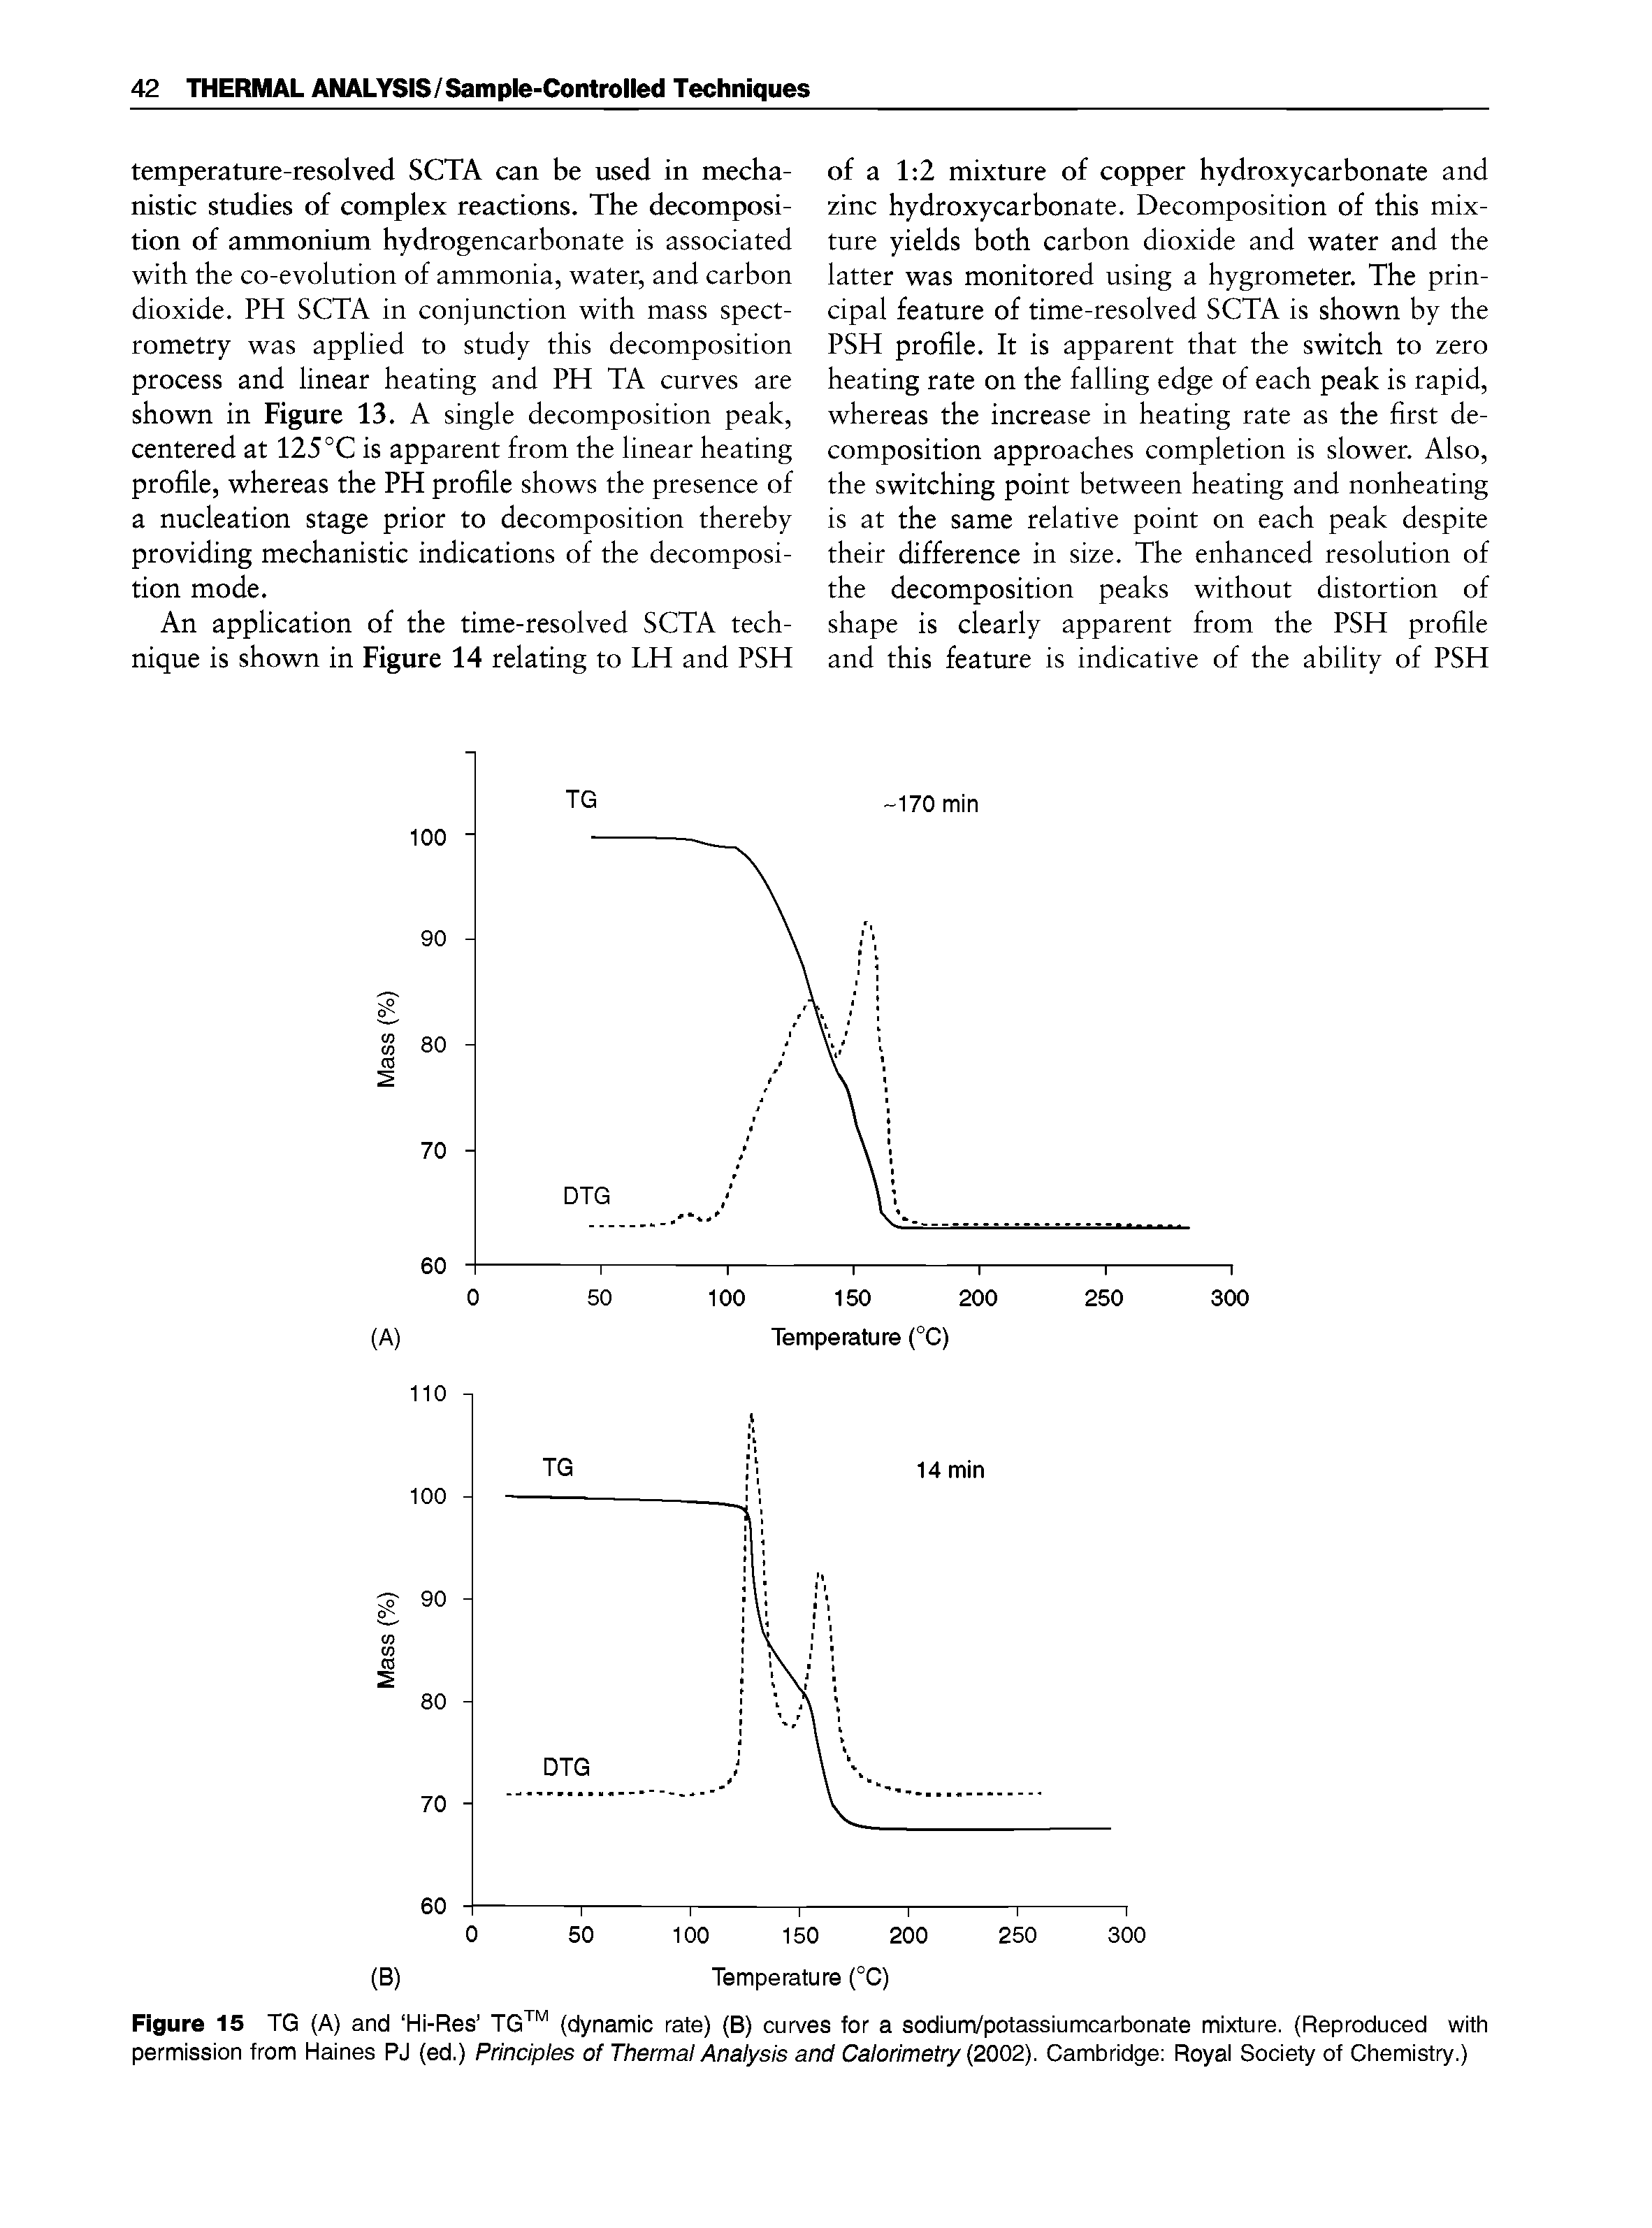 Figure 15 TG (A) and Hi-Res TG (dynamic rate) (B) curves for a sodium/potassiumcarbonate mixture. (Reproduced with permission from Haines PJ (ed.) Principles of Thermal Analysis and Calorimetry 2002). Cambridge Royai Society of Chemistry.)...